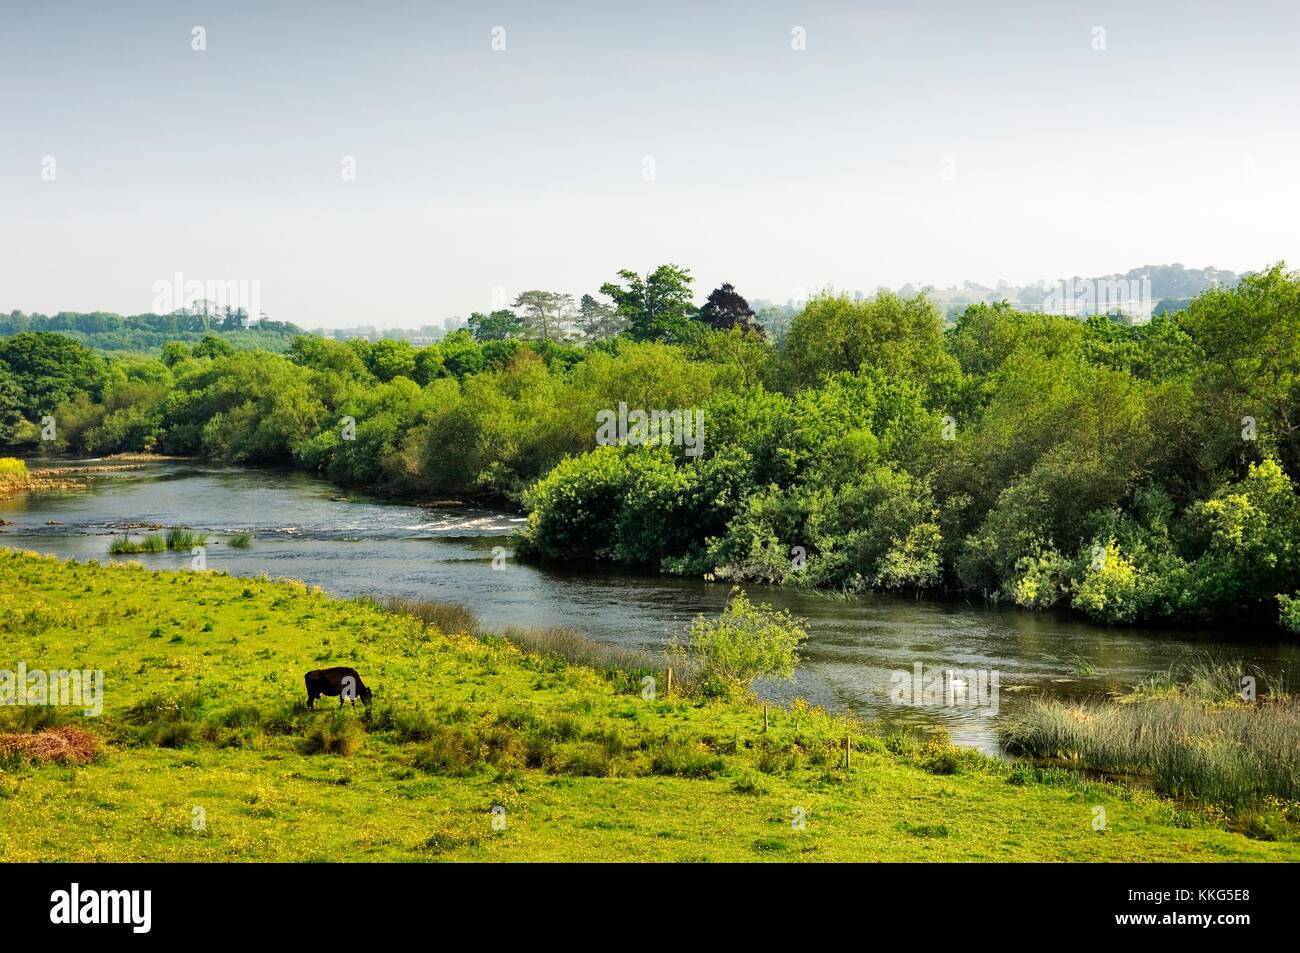 Ford on River Boyne at Oldbridge where King William of Orange crossed to victory against King James at the Battle of the Boyne. Stock Photo